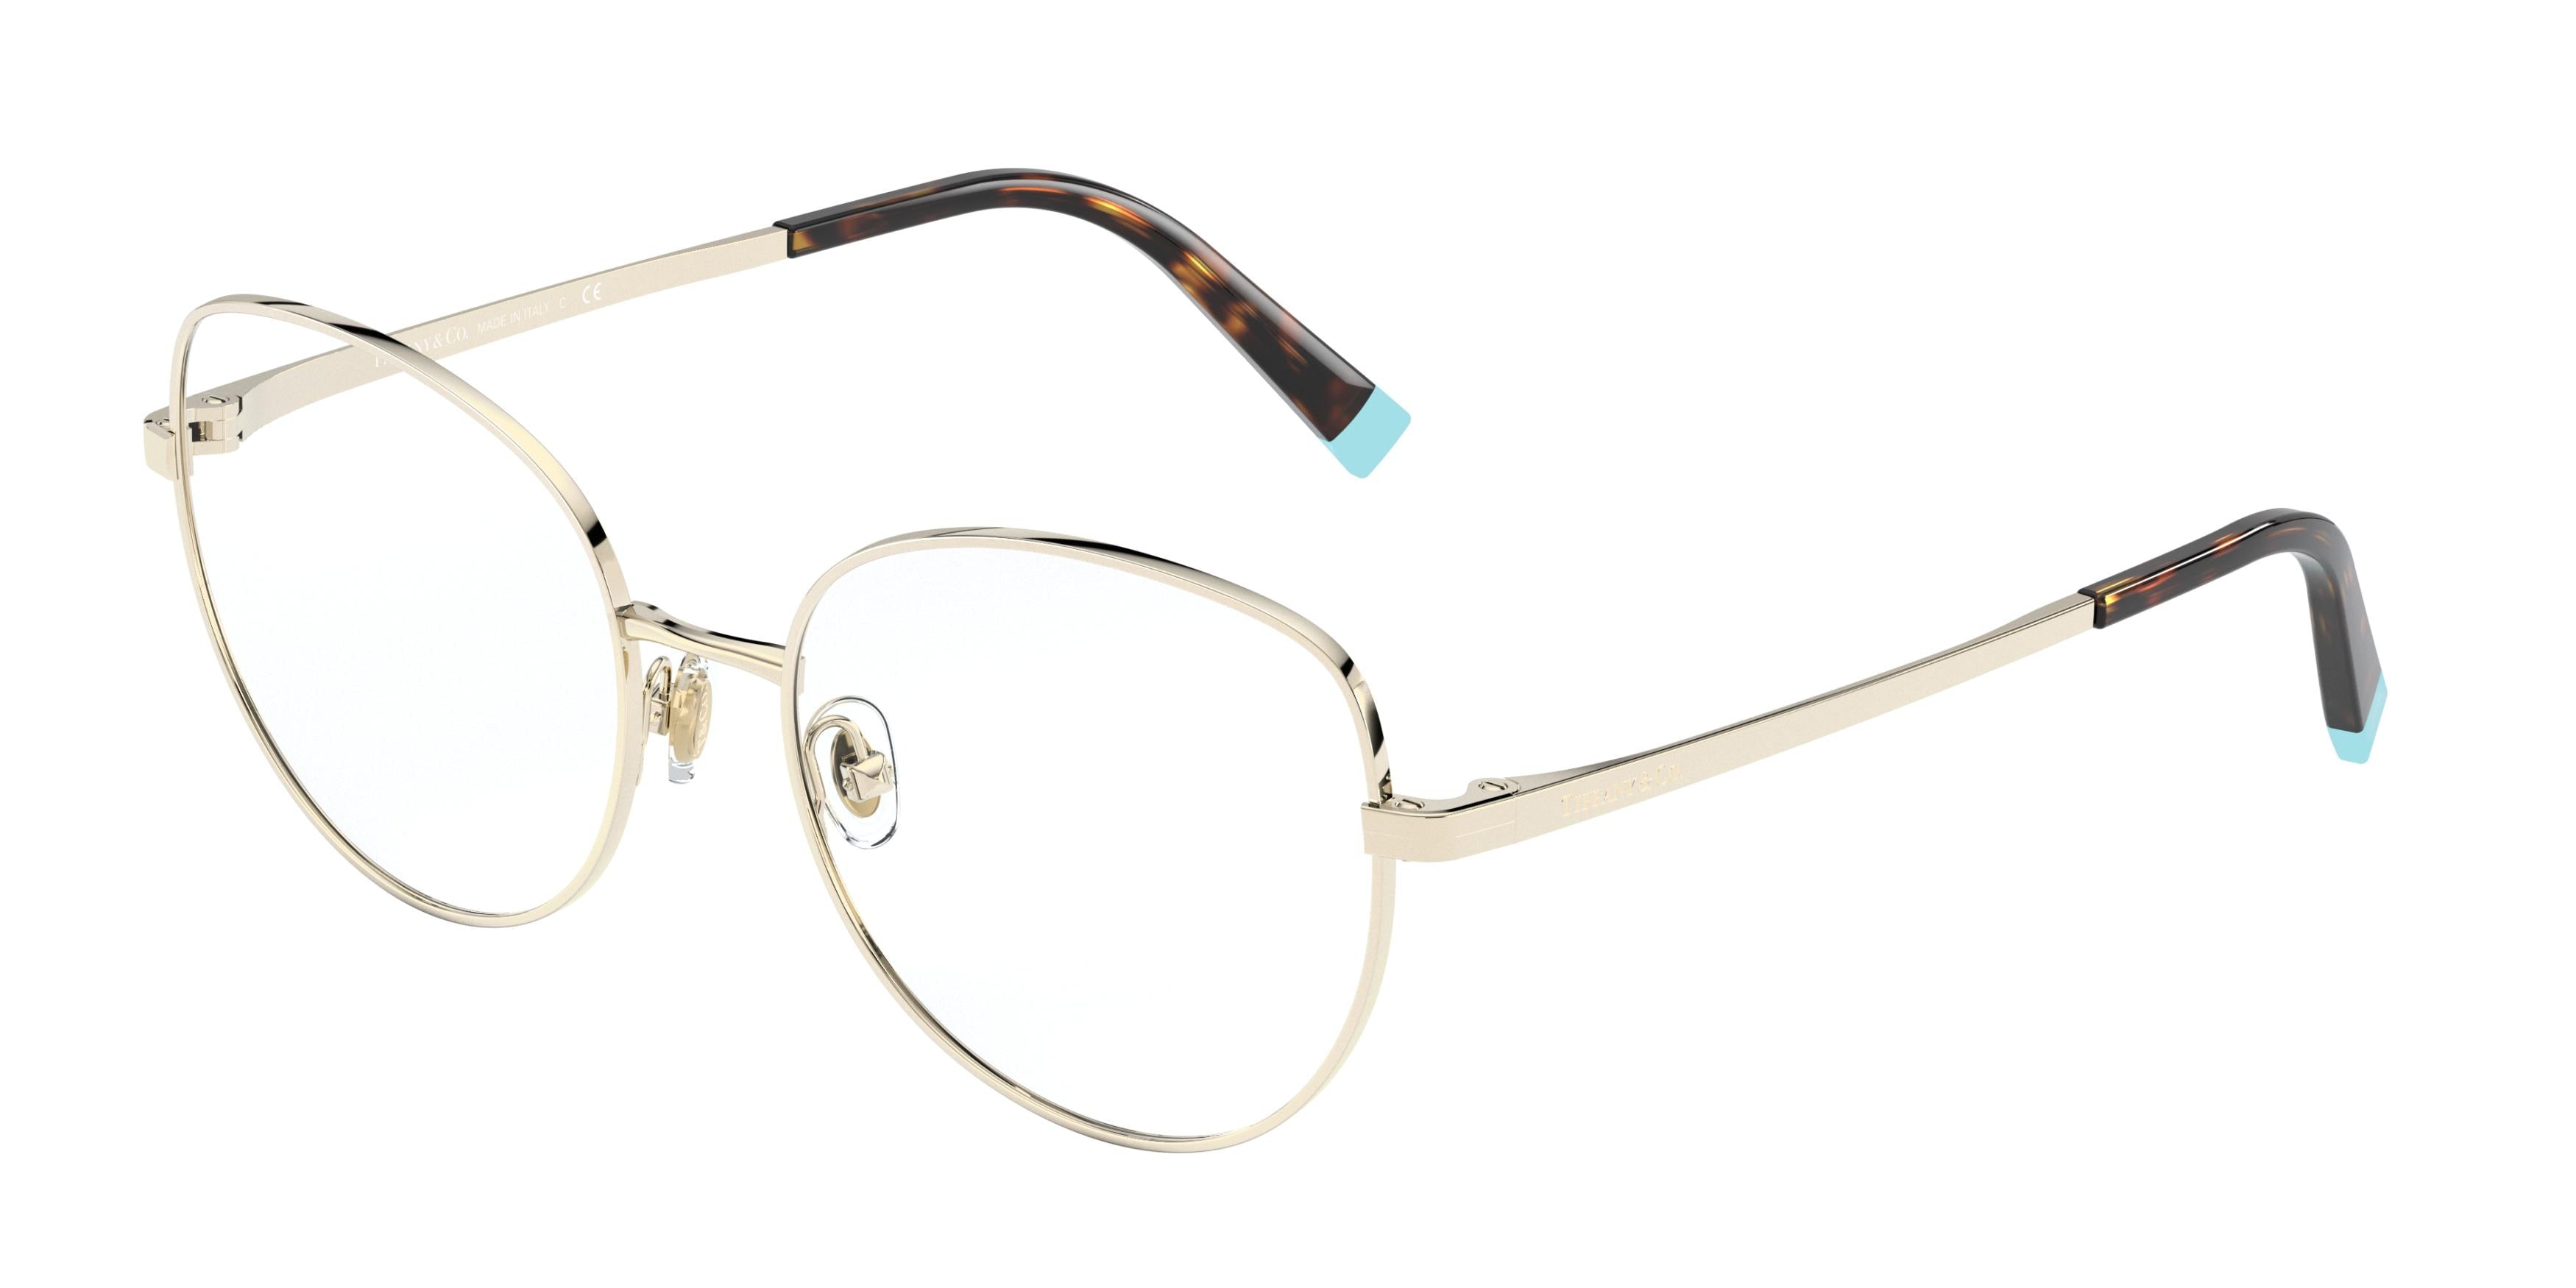 Tiffany TF1138 Round Eyeglasses  6021-Pale Gold 50-140-17 - Color Map Gold